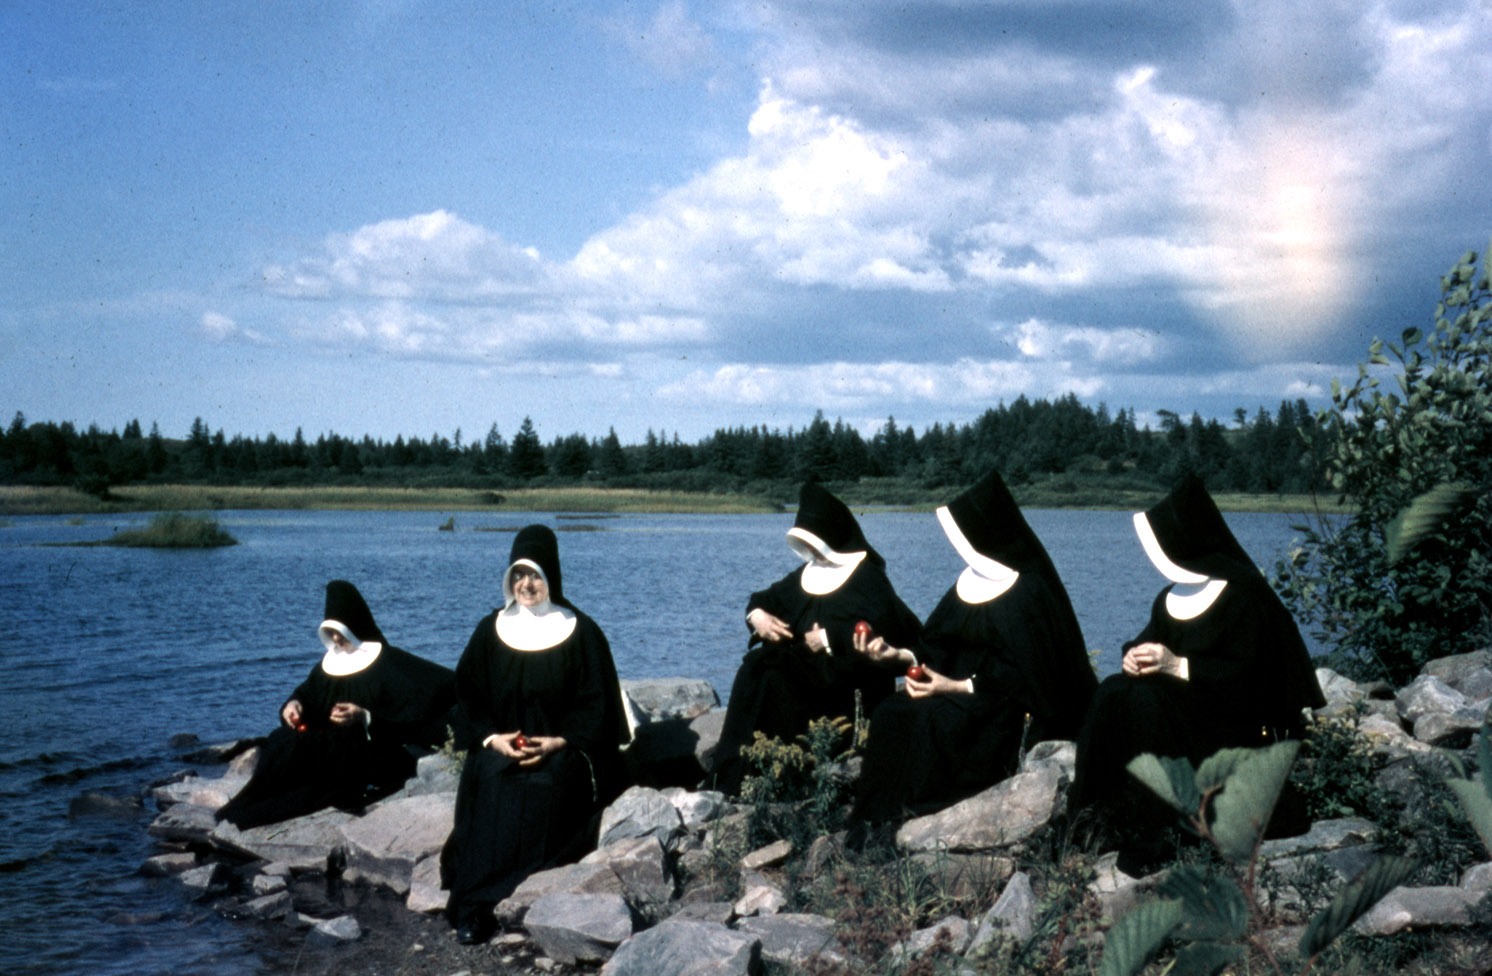 communityalbums - Sisters of Charity-Halifax sitting on rocks near water with red apples, Camp Monte Bello, Yarmouth, Nova Scotia.